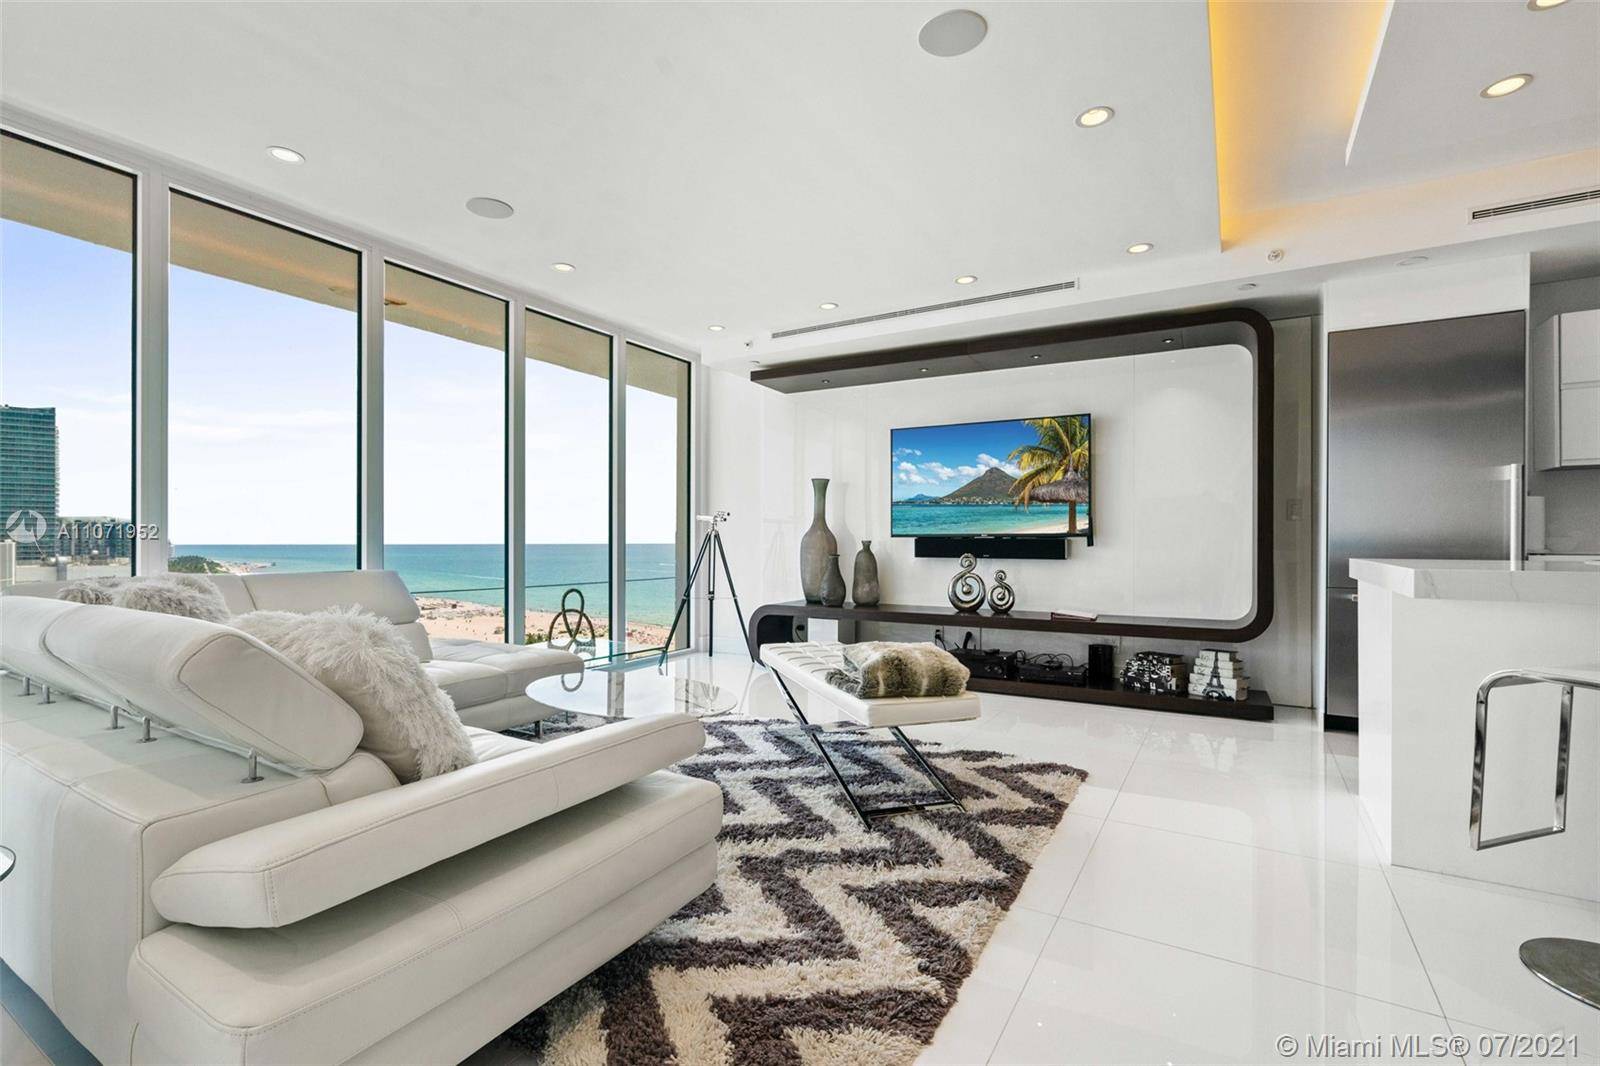 The Decoplage condominium is located at 100 Lincoln Road in the heart of South Beach area of Miami Beach, just a few steps from the Atlantic Ocean and a few ...